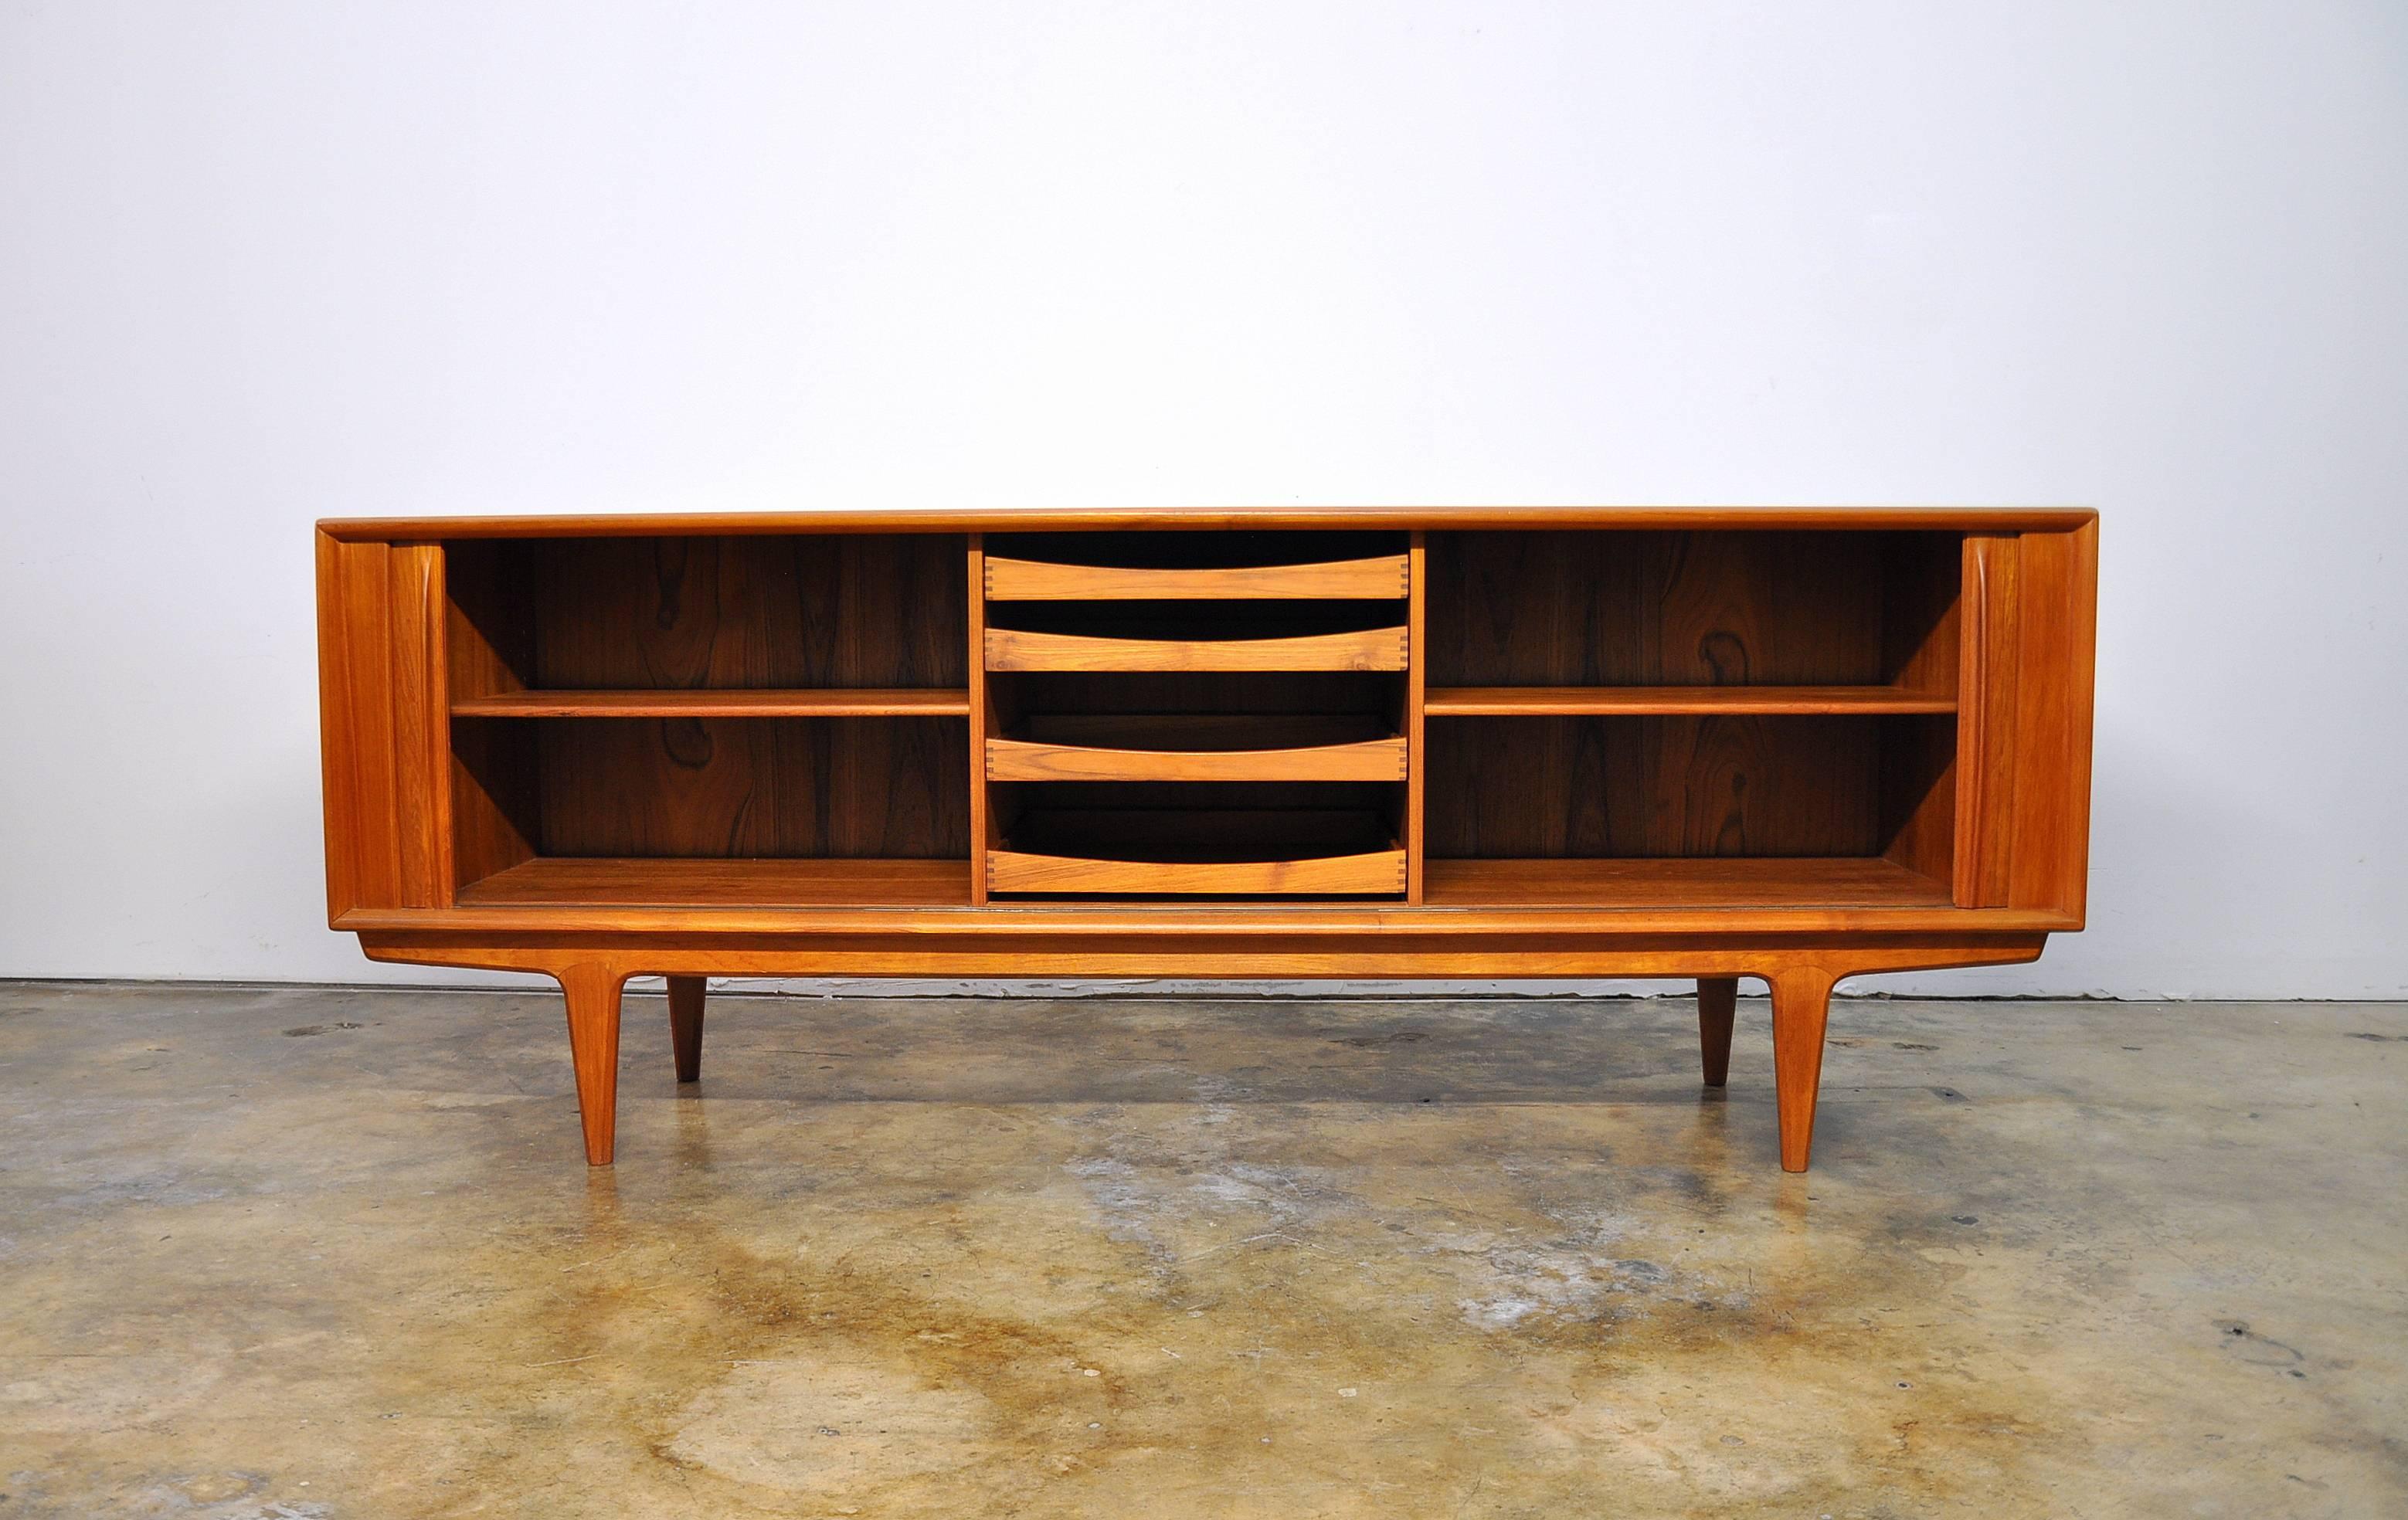 This nearly 7 foot long Mid-Century teak sideboard features two individual sliding tambour doors that allow unobstructed access to the interior. The door fronts have sculpted teak handles and grain patterns that are quite striking. The interior